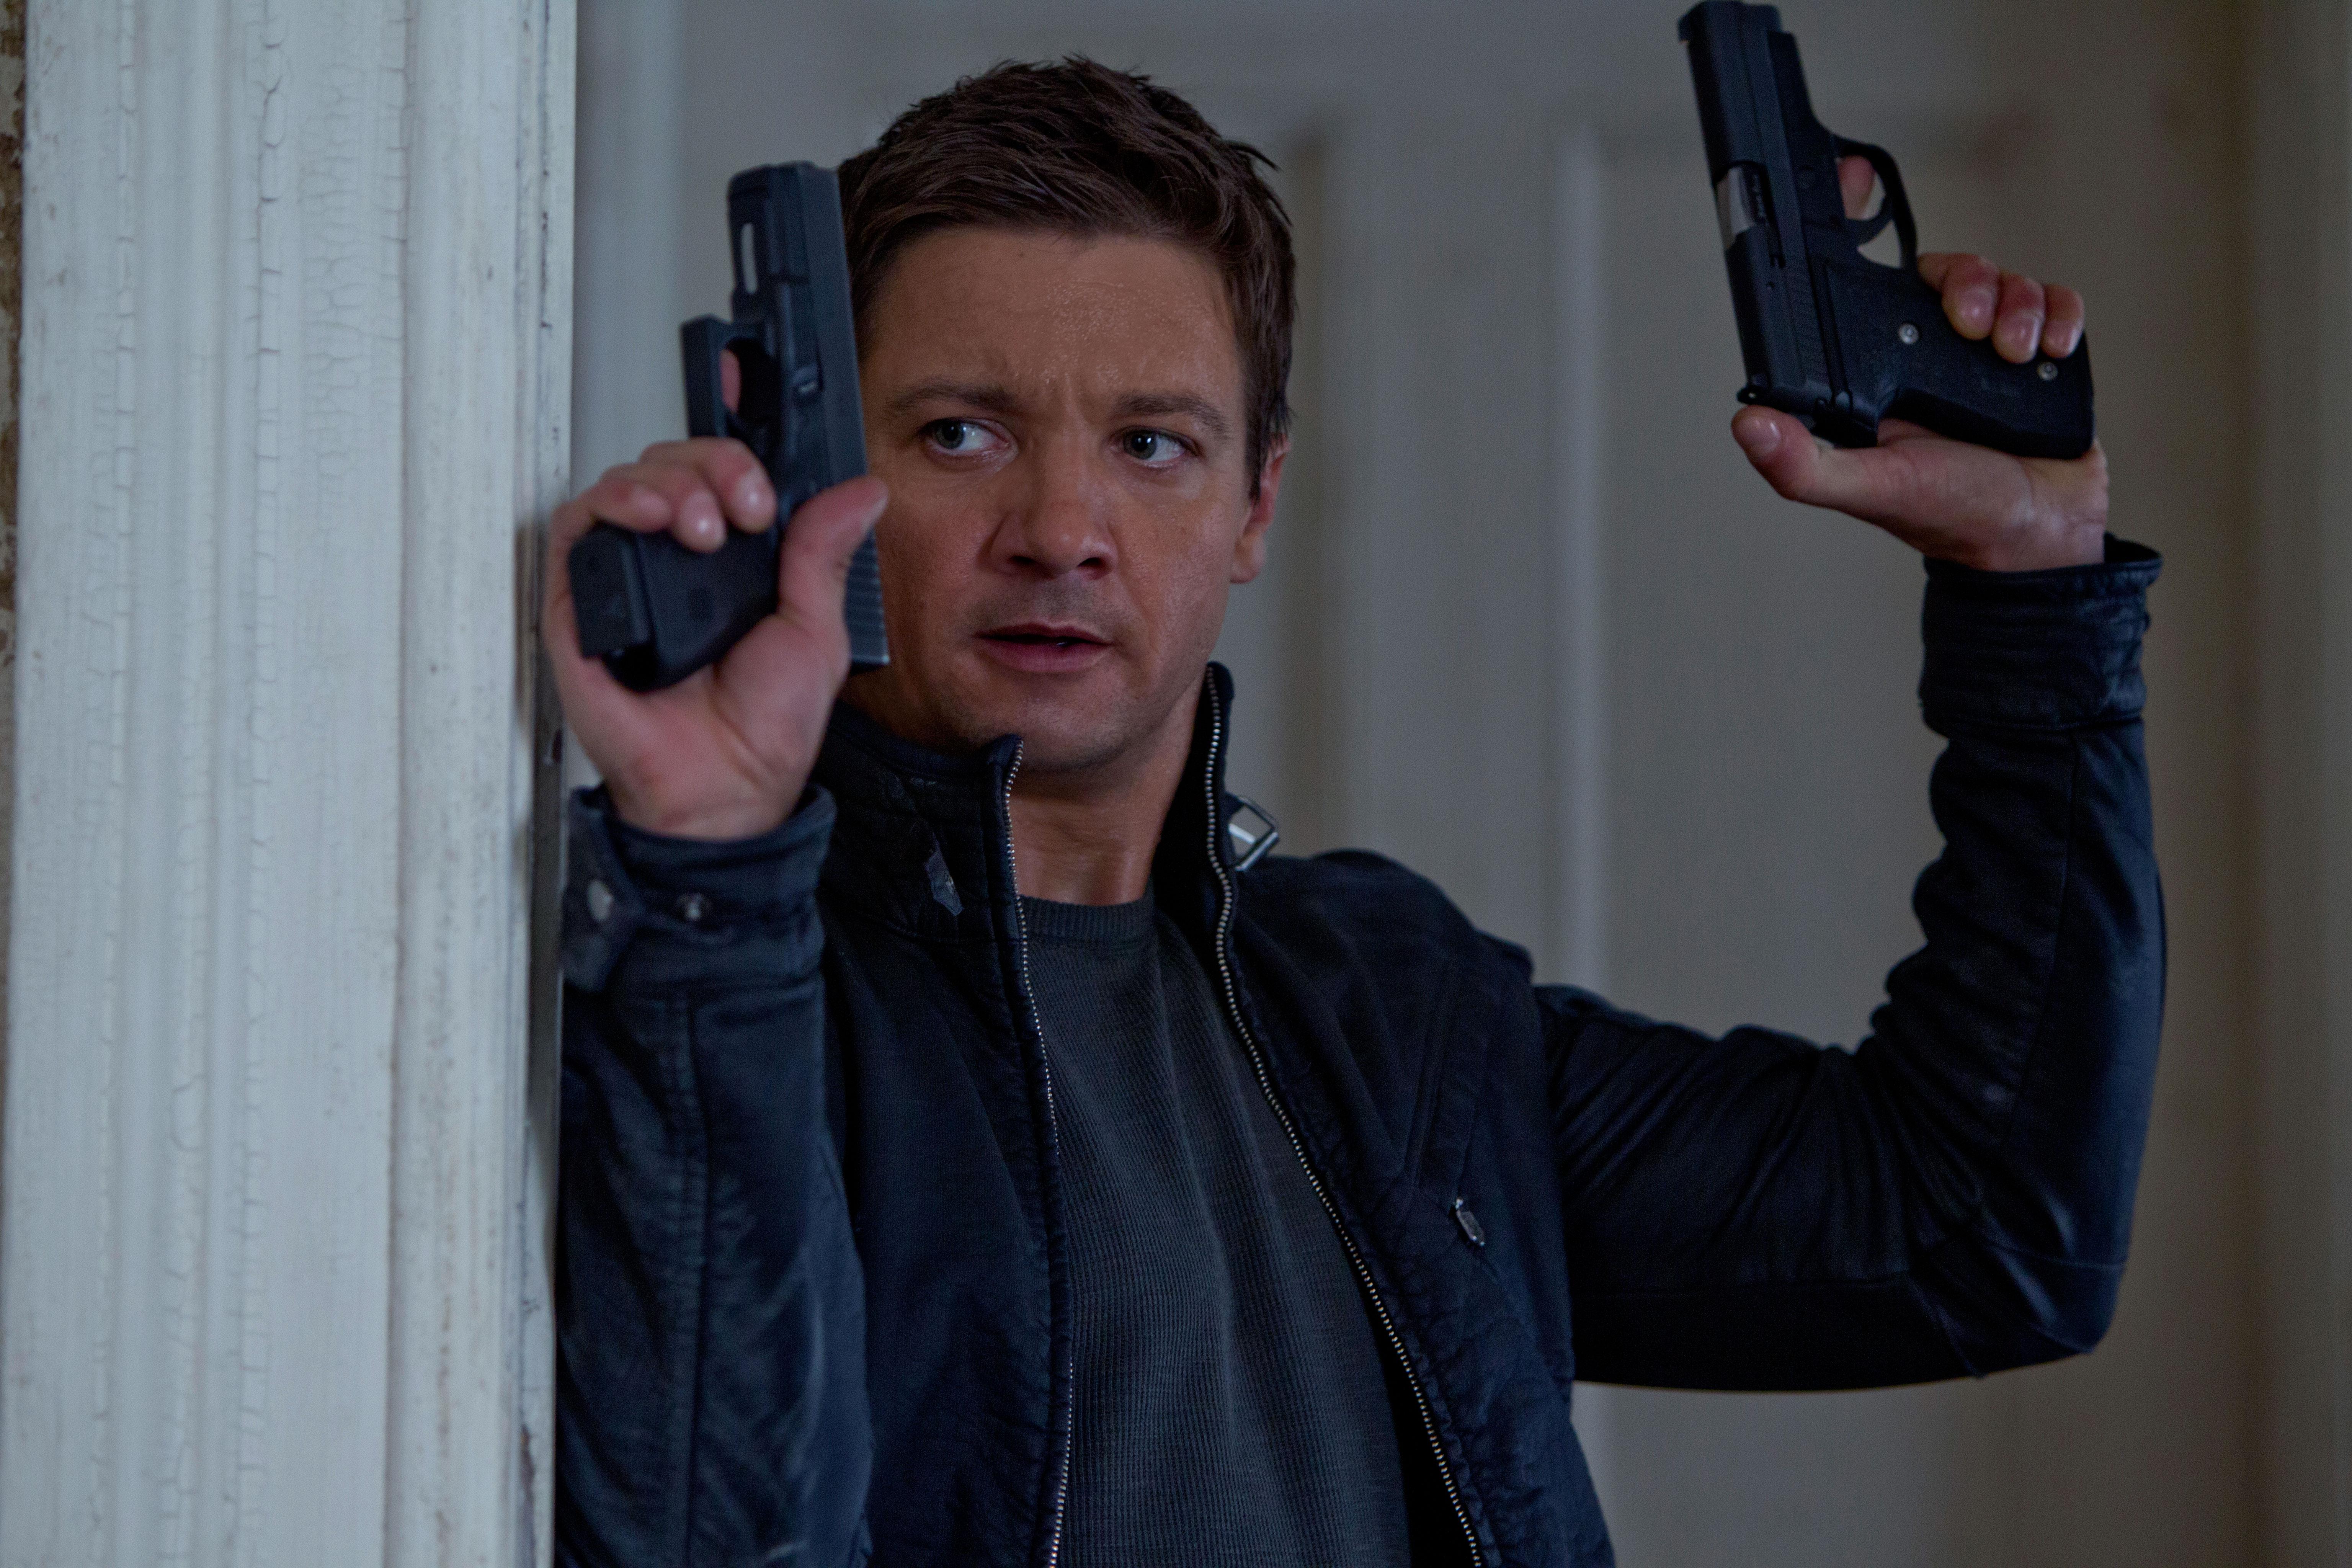 THE BOURNE LEGACY Clips and Image